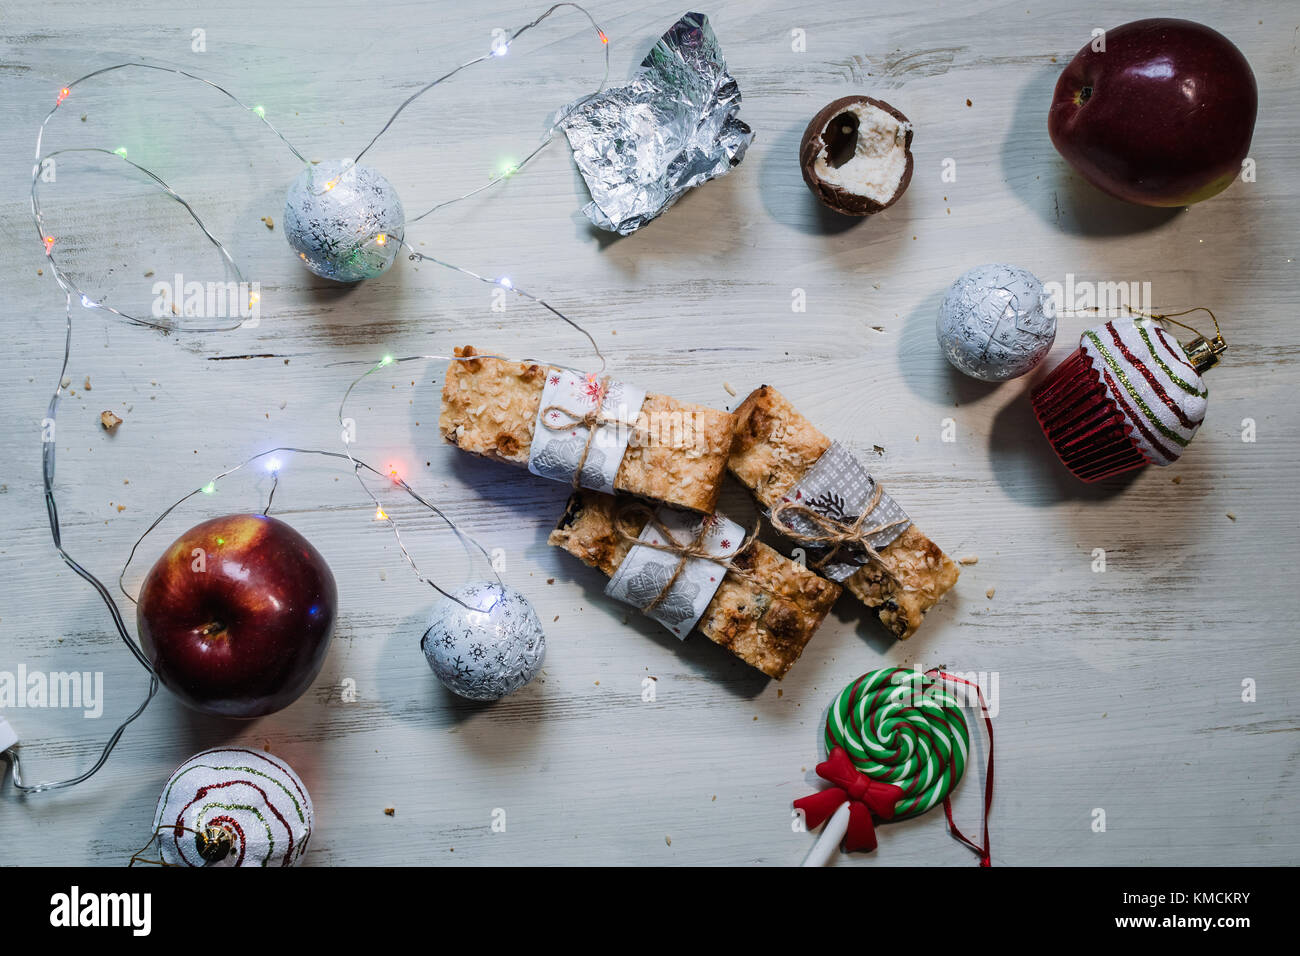 Christmas cookies, red apples, and lights Stock Photo